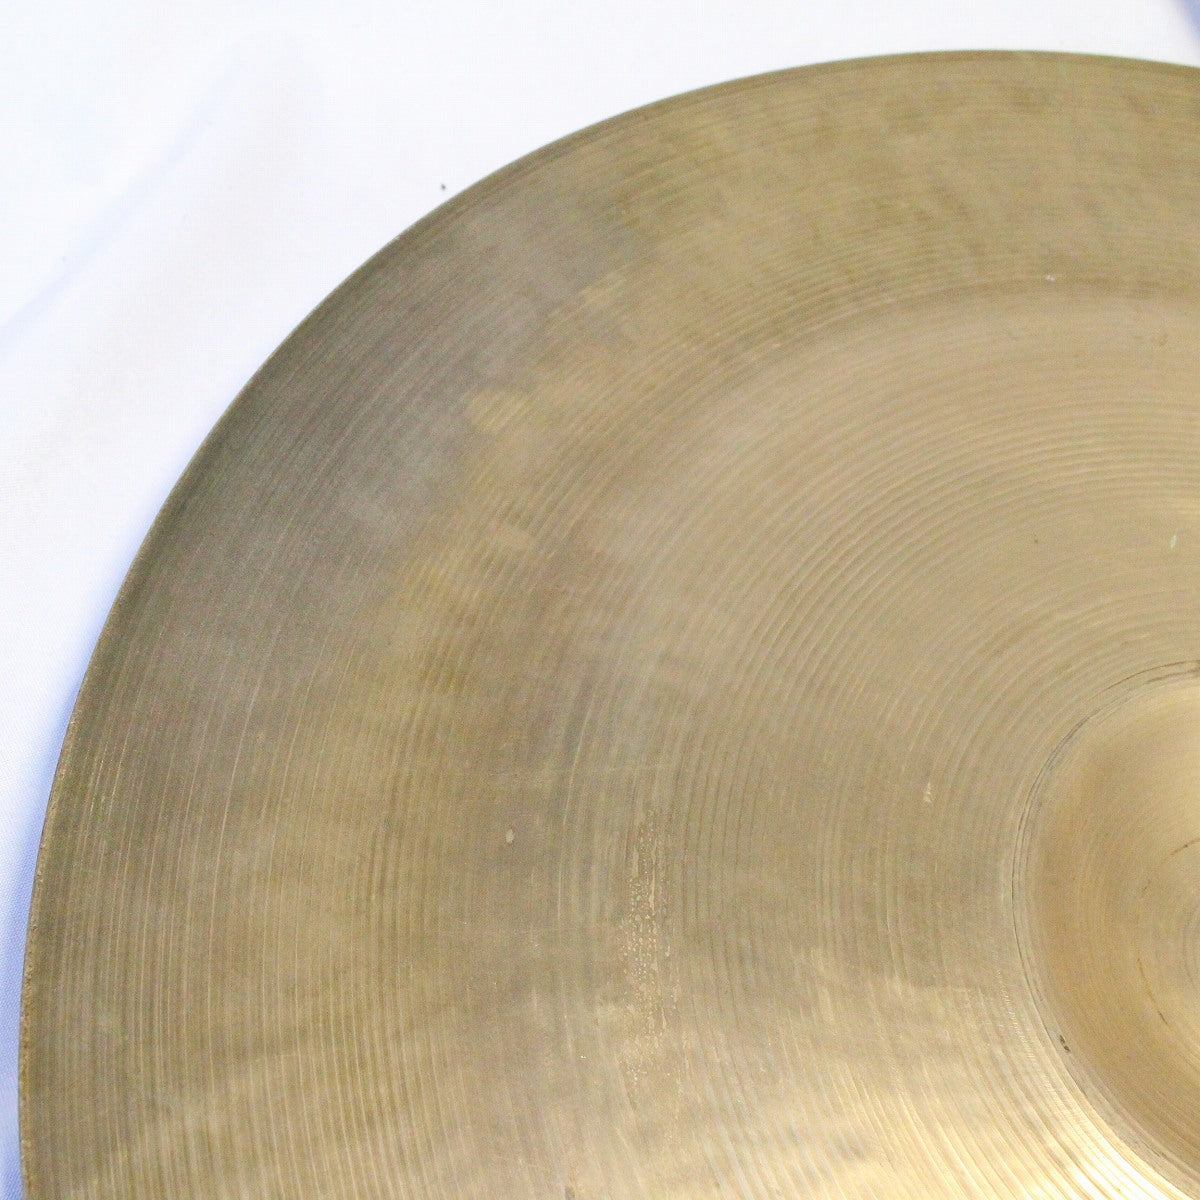 USED ZILDJIAN / mid50s A Large Stamp 22" RIDE 2506g 50s Old A Zildjian Ride Cymbal [08]